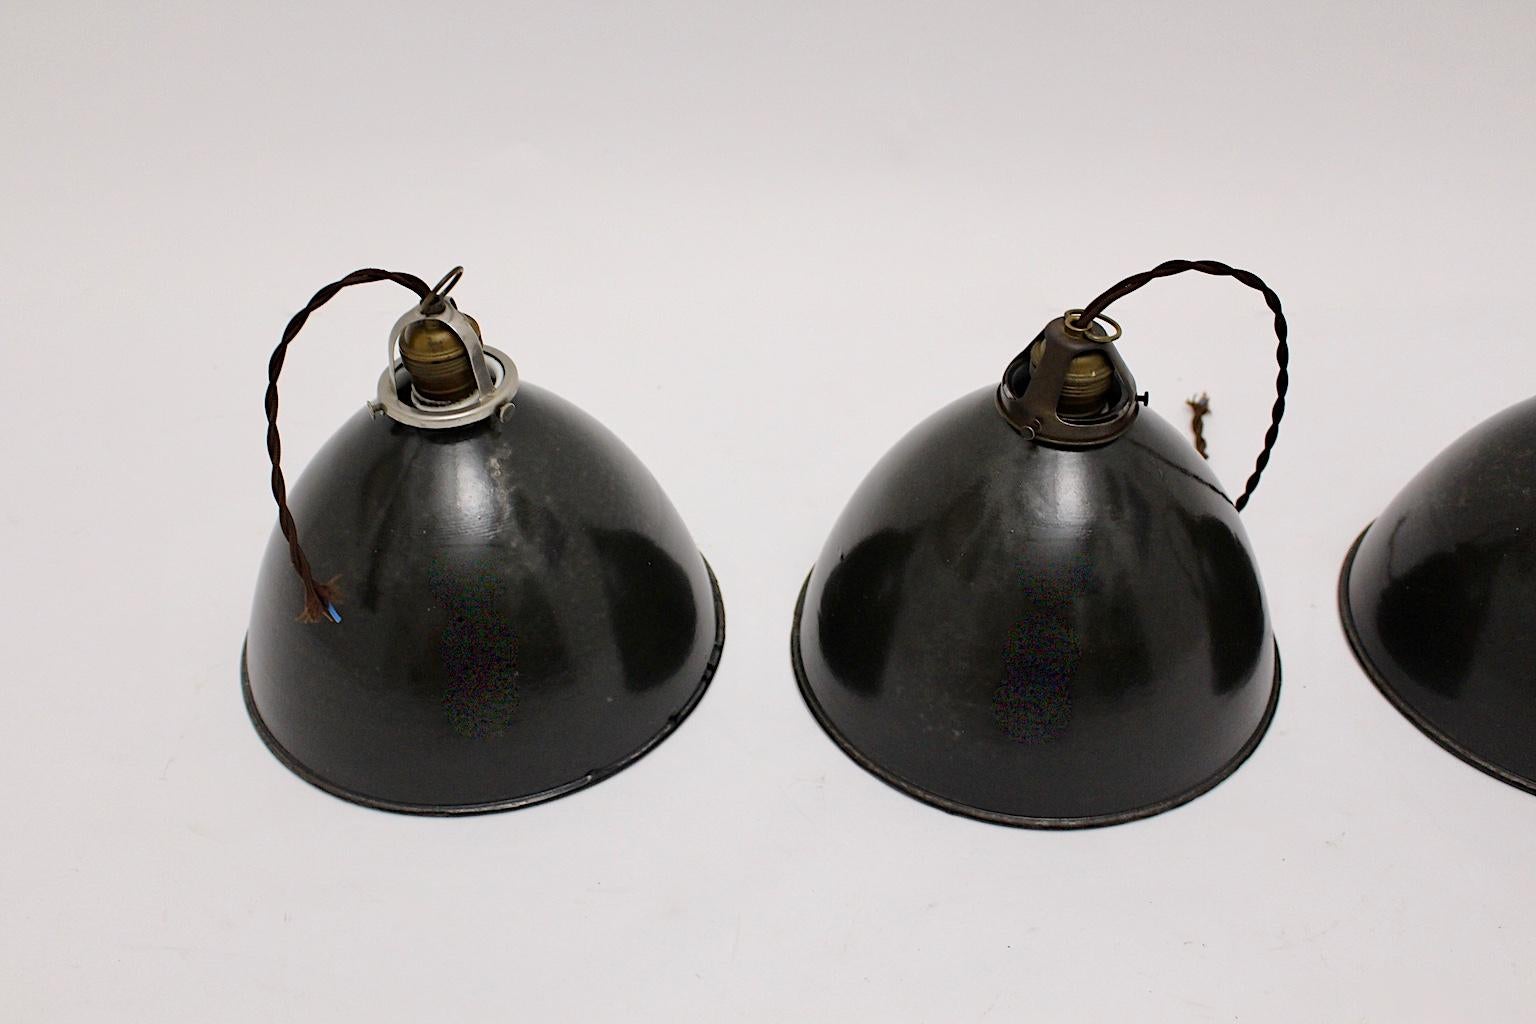 Bauhaus Black and White Vintage Set of four Email Hanging Lamps, 1920s, Germany For Sale 3